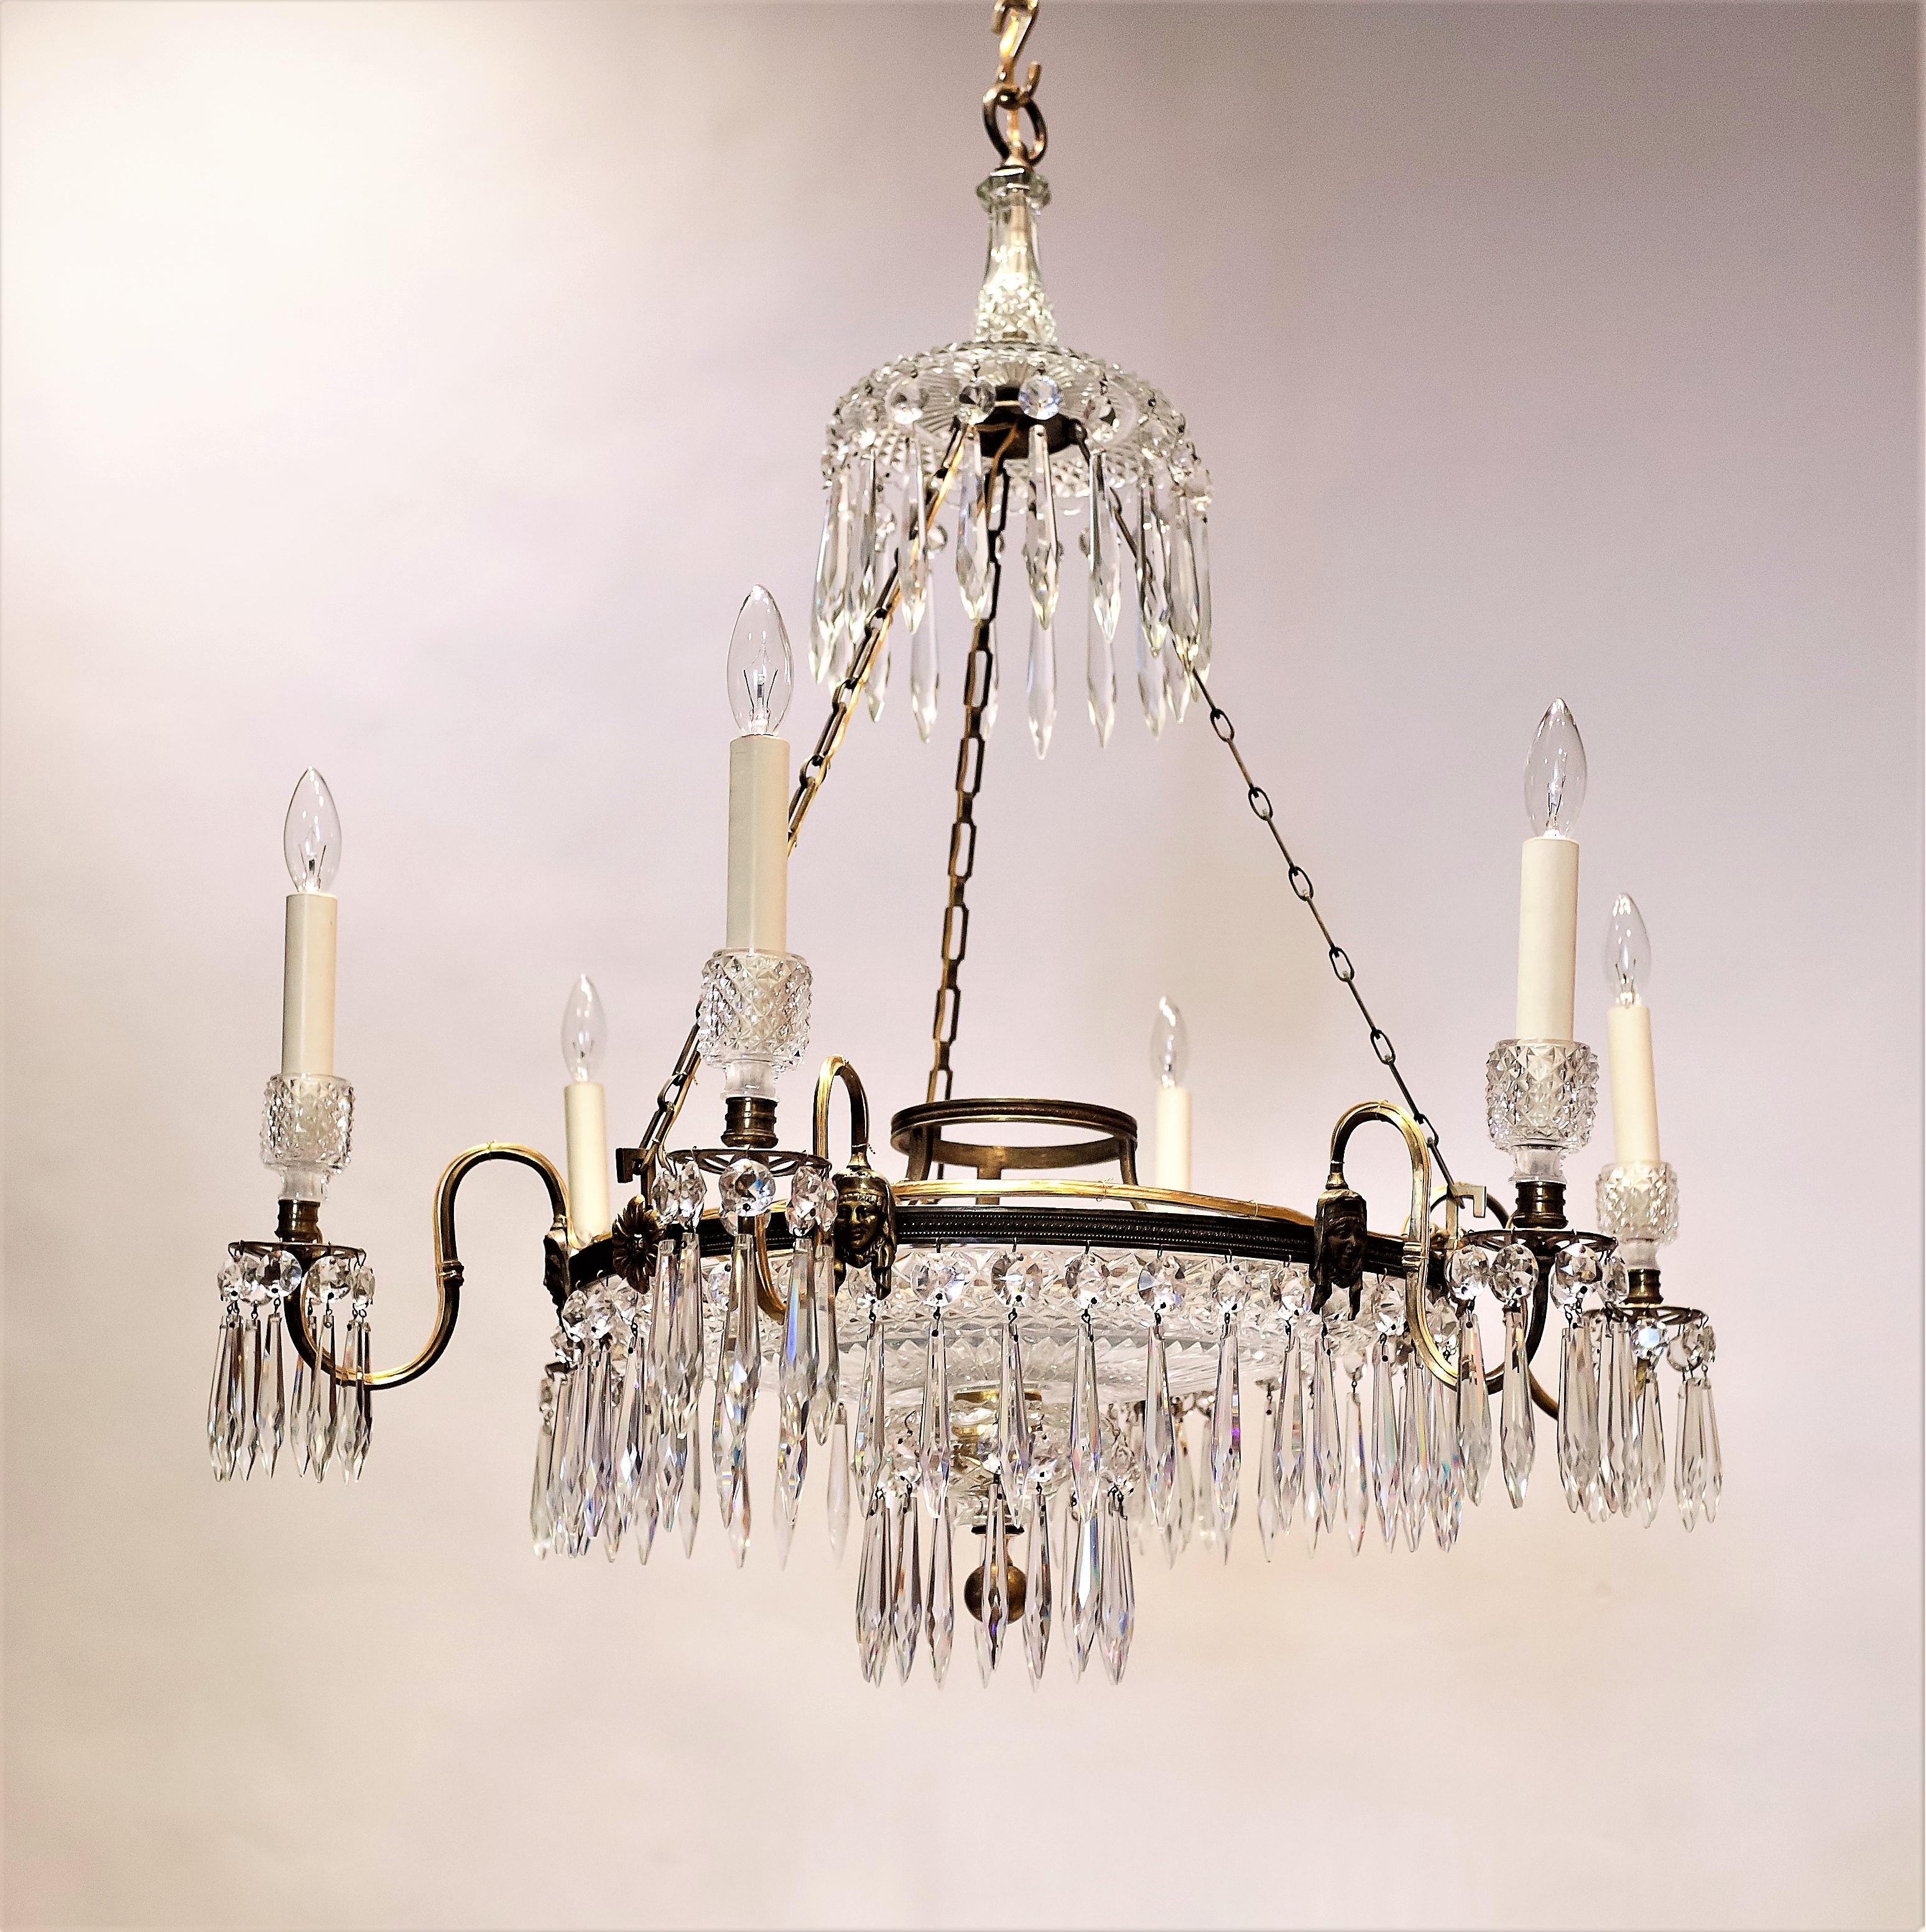 This is English Regency chandelier work at its very best - the perfect statement fixture for a grand dining room, foyer, or living room. Originally a candle-burning fixture, it has been electrified with well-concealed wiring. Hand-cast gilt and